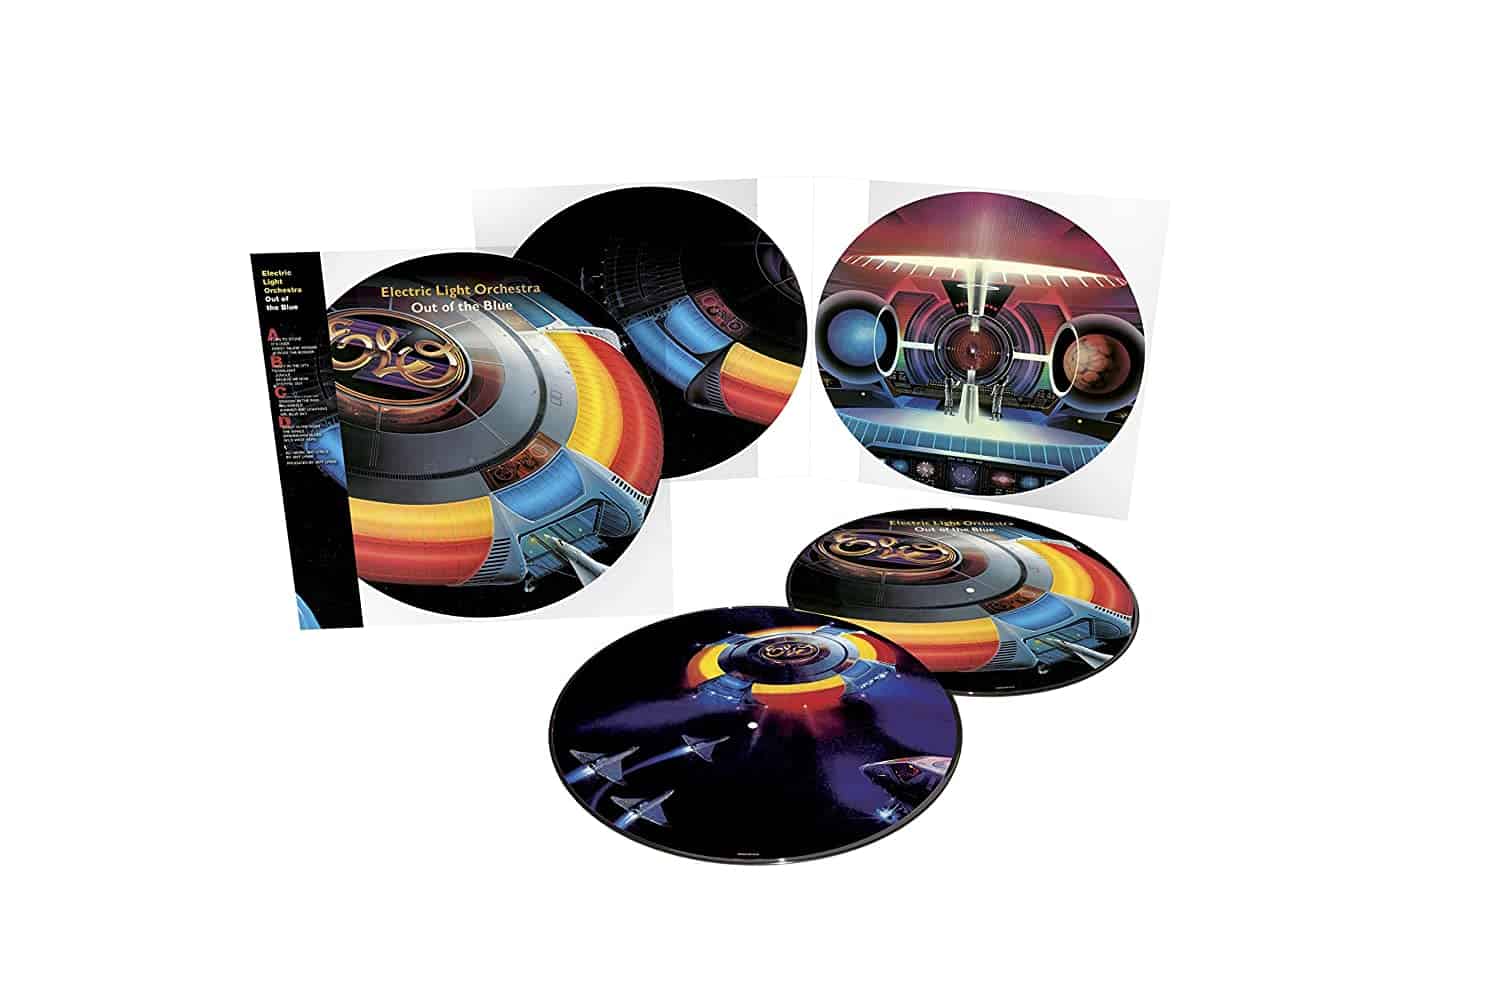 Electric-light-orchestra-ELO-out-of-the-blue-picture-disc-vinyl-record-album-3